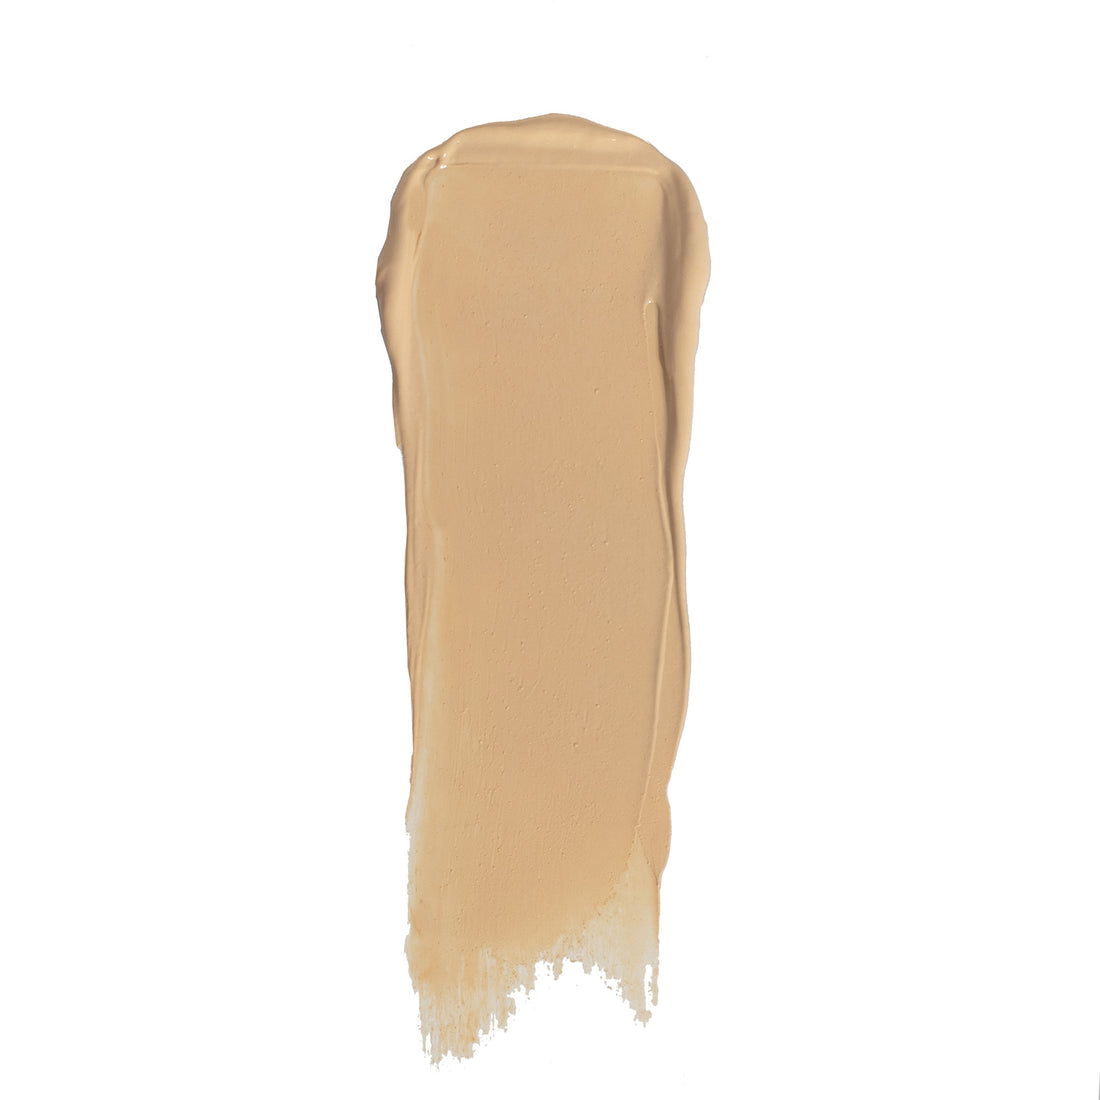 bPerfect CHROMA Conceal Liquid Concealer W1, swatch